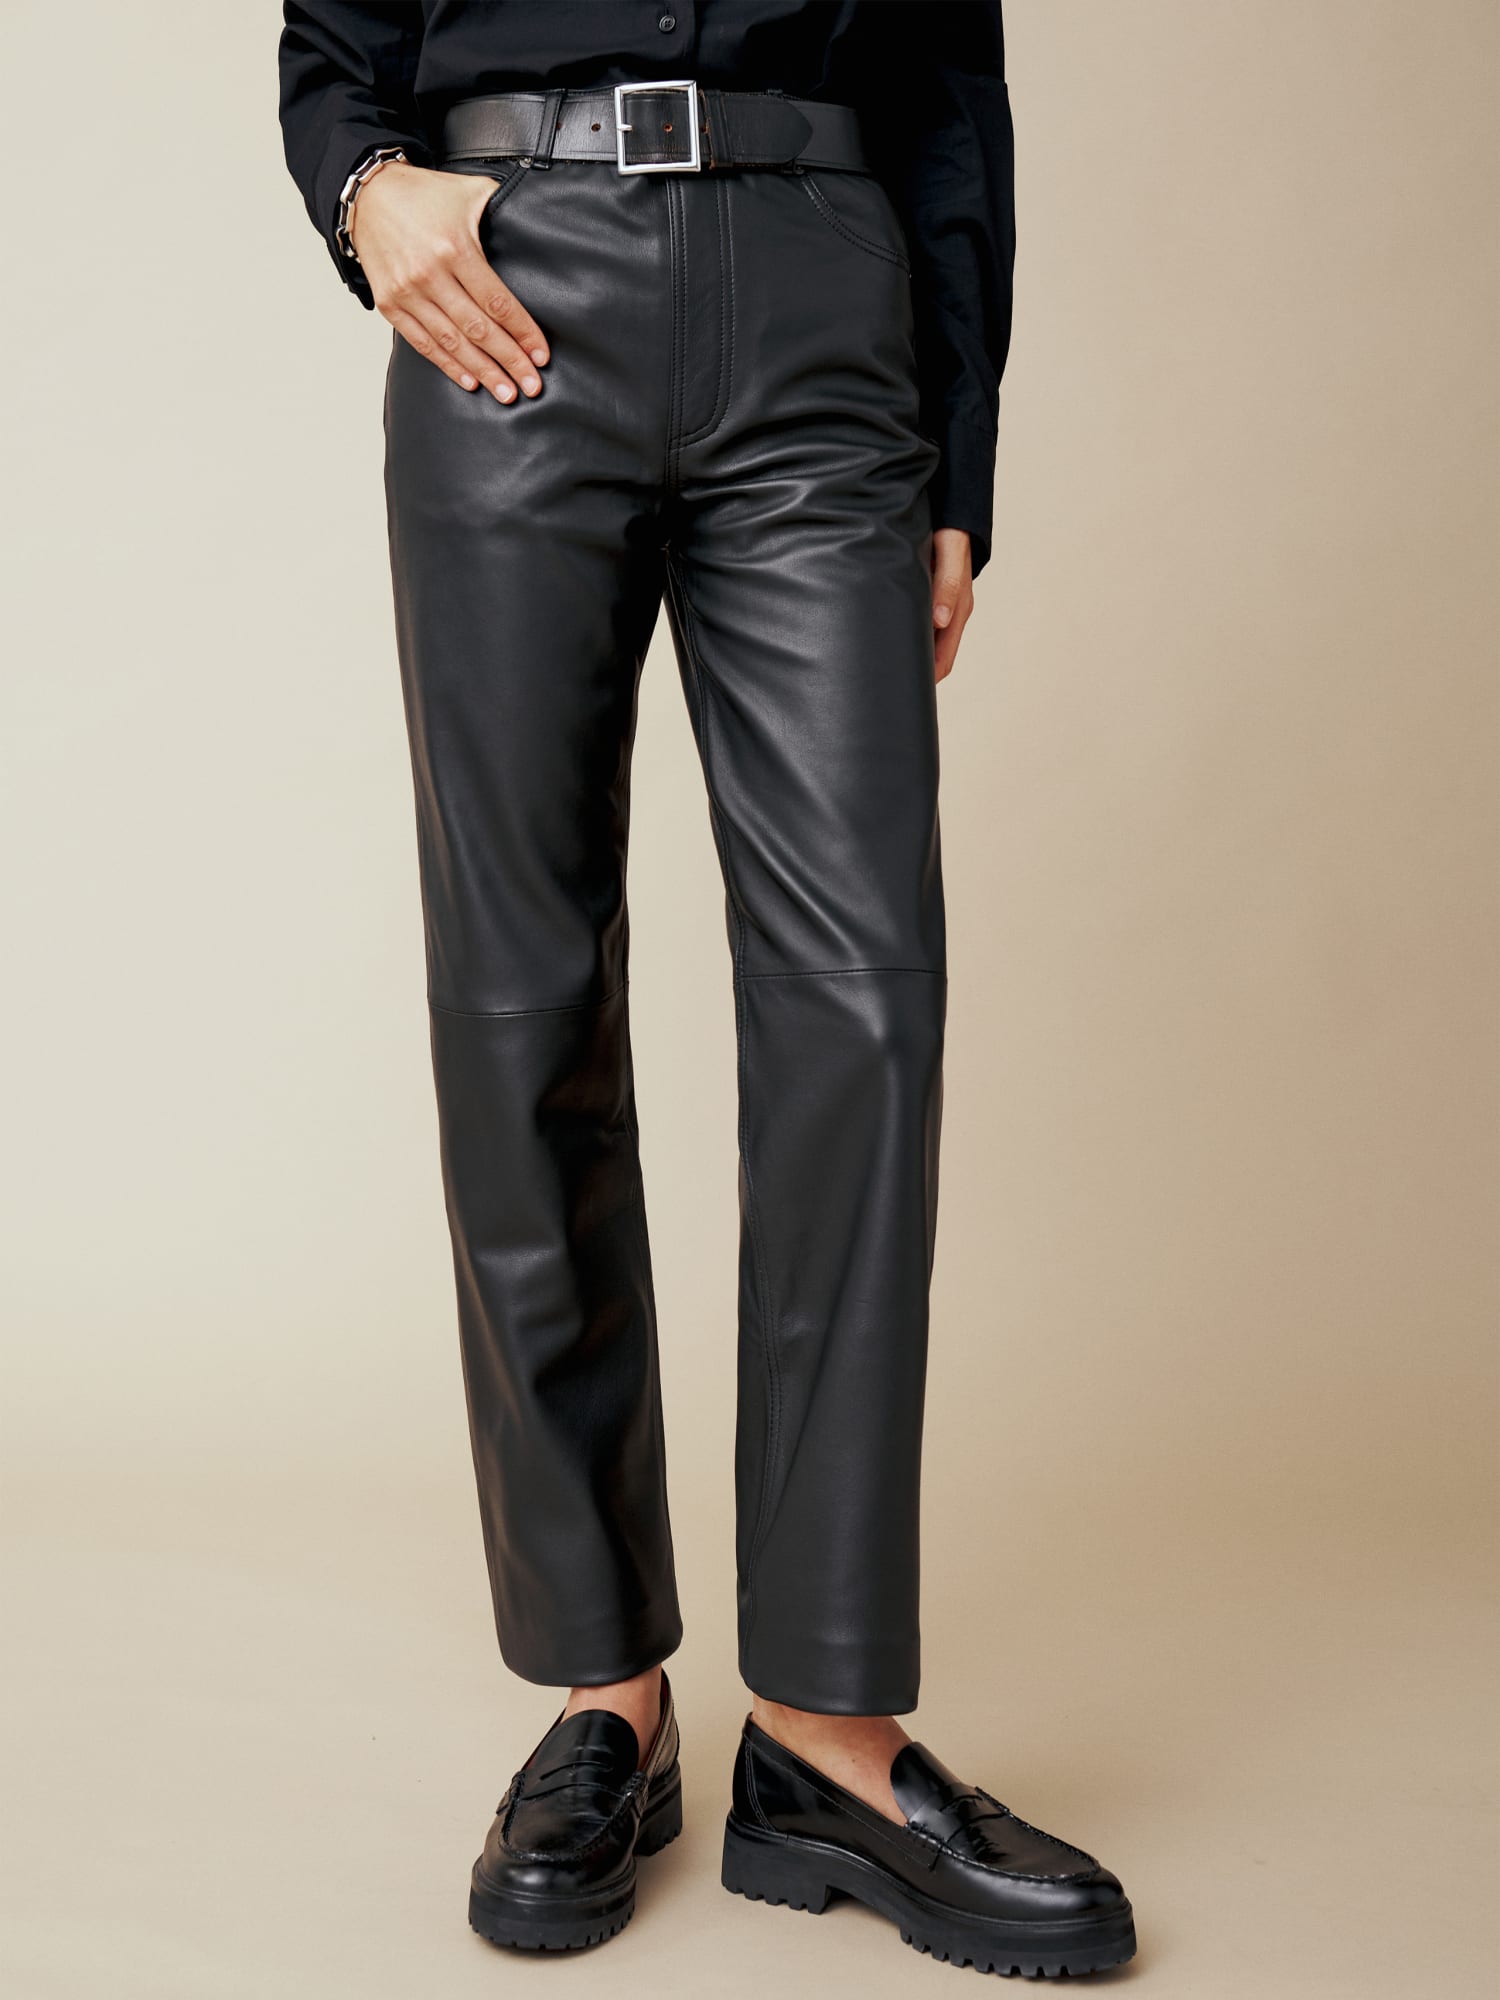 Tapestry Leather Pants - Ready to Wear